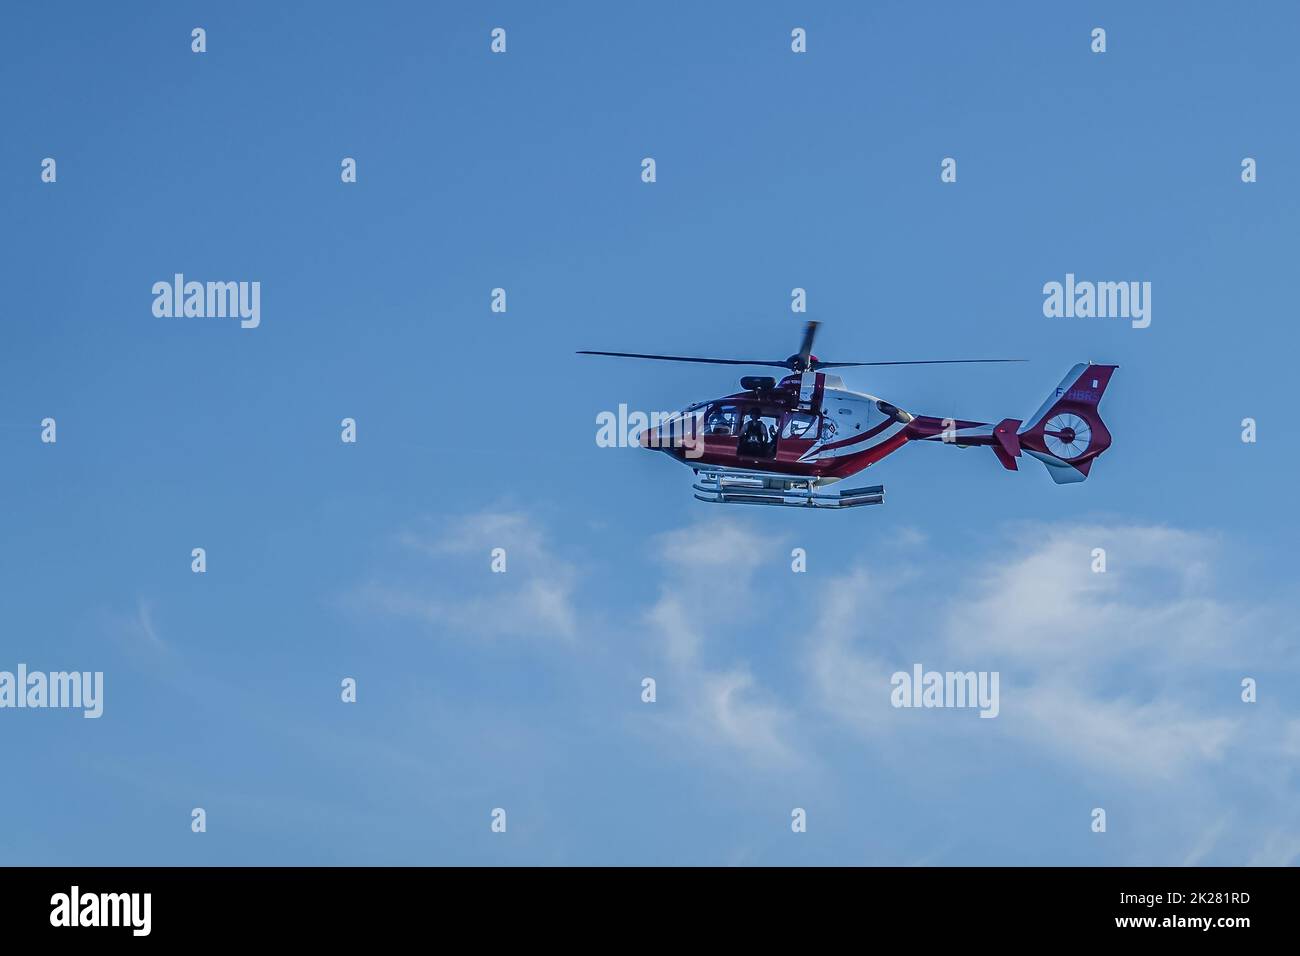 Europe, France, Dunkerque - July 9, 2022: Port scenery. Bordeaux-white Helicopter flies over under blue sky delivering pilot for ships entering harbor Stock Photo